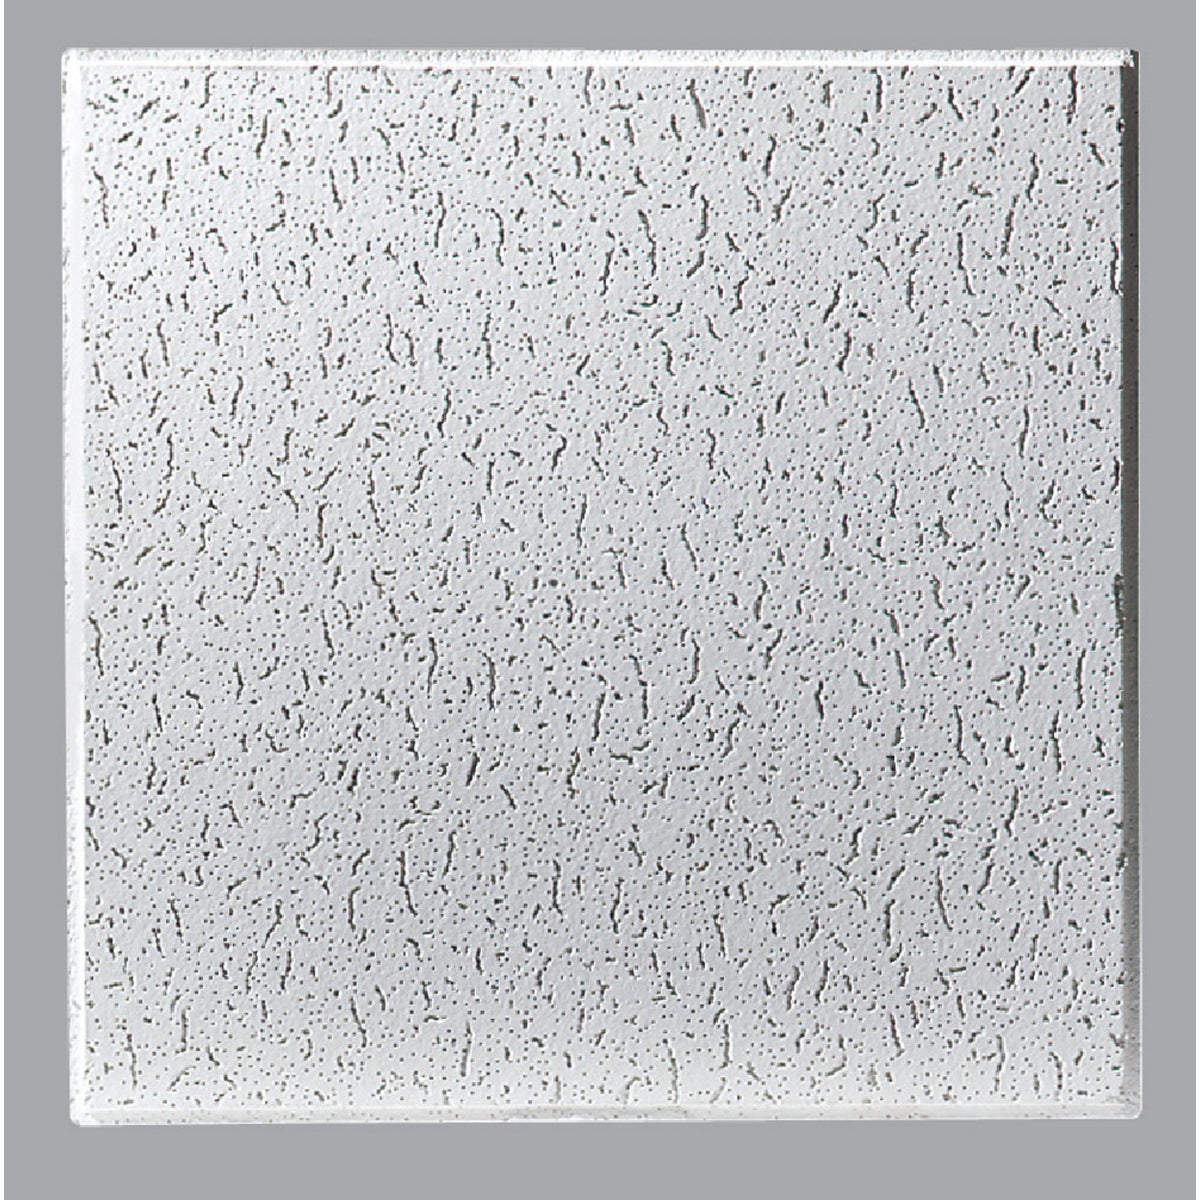 Item 113921, USG Fissured Basic Acoustical Ceiling Panels are economical, cost-effective